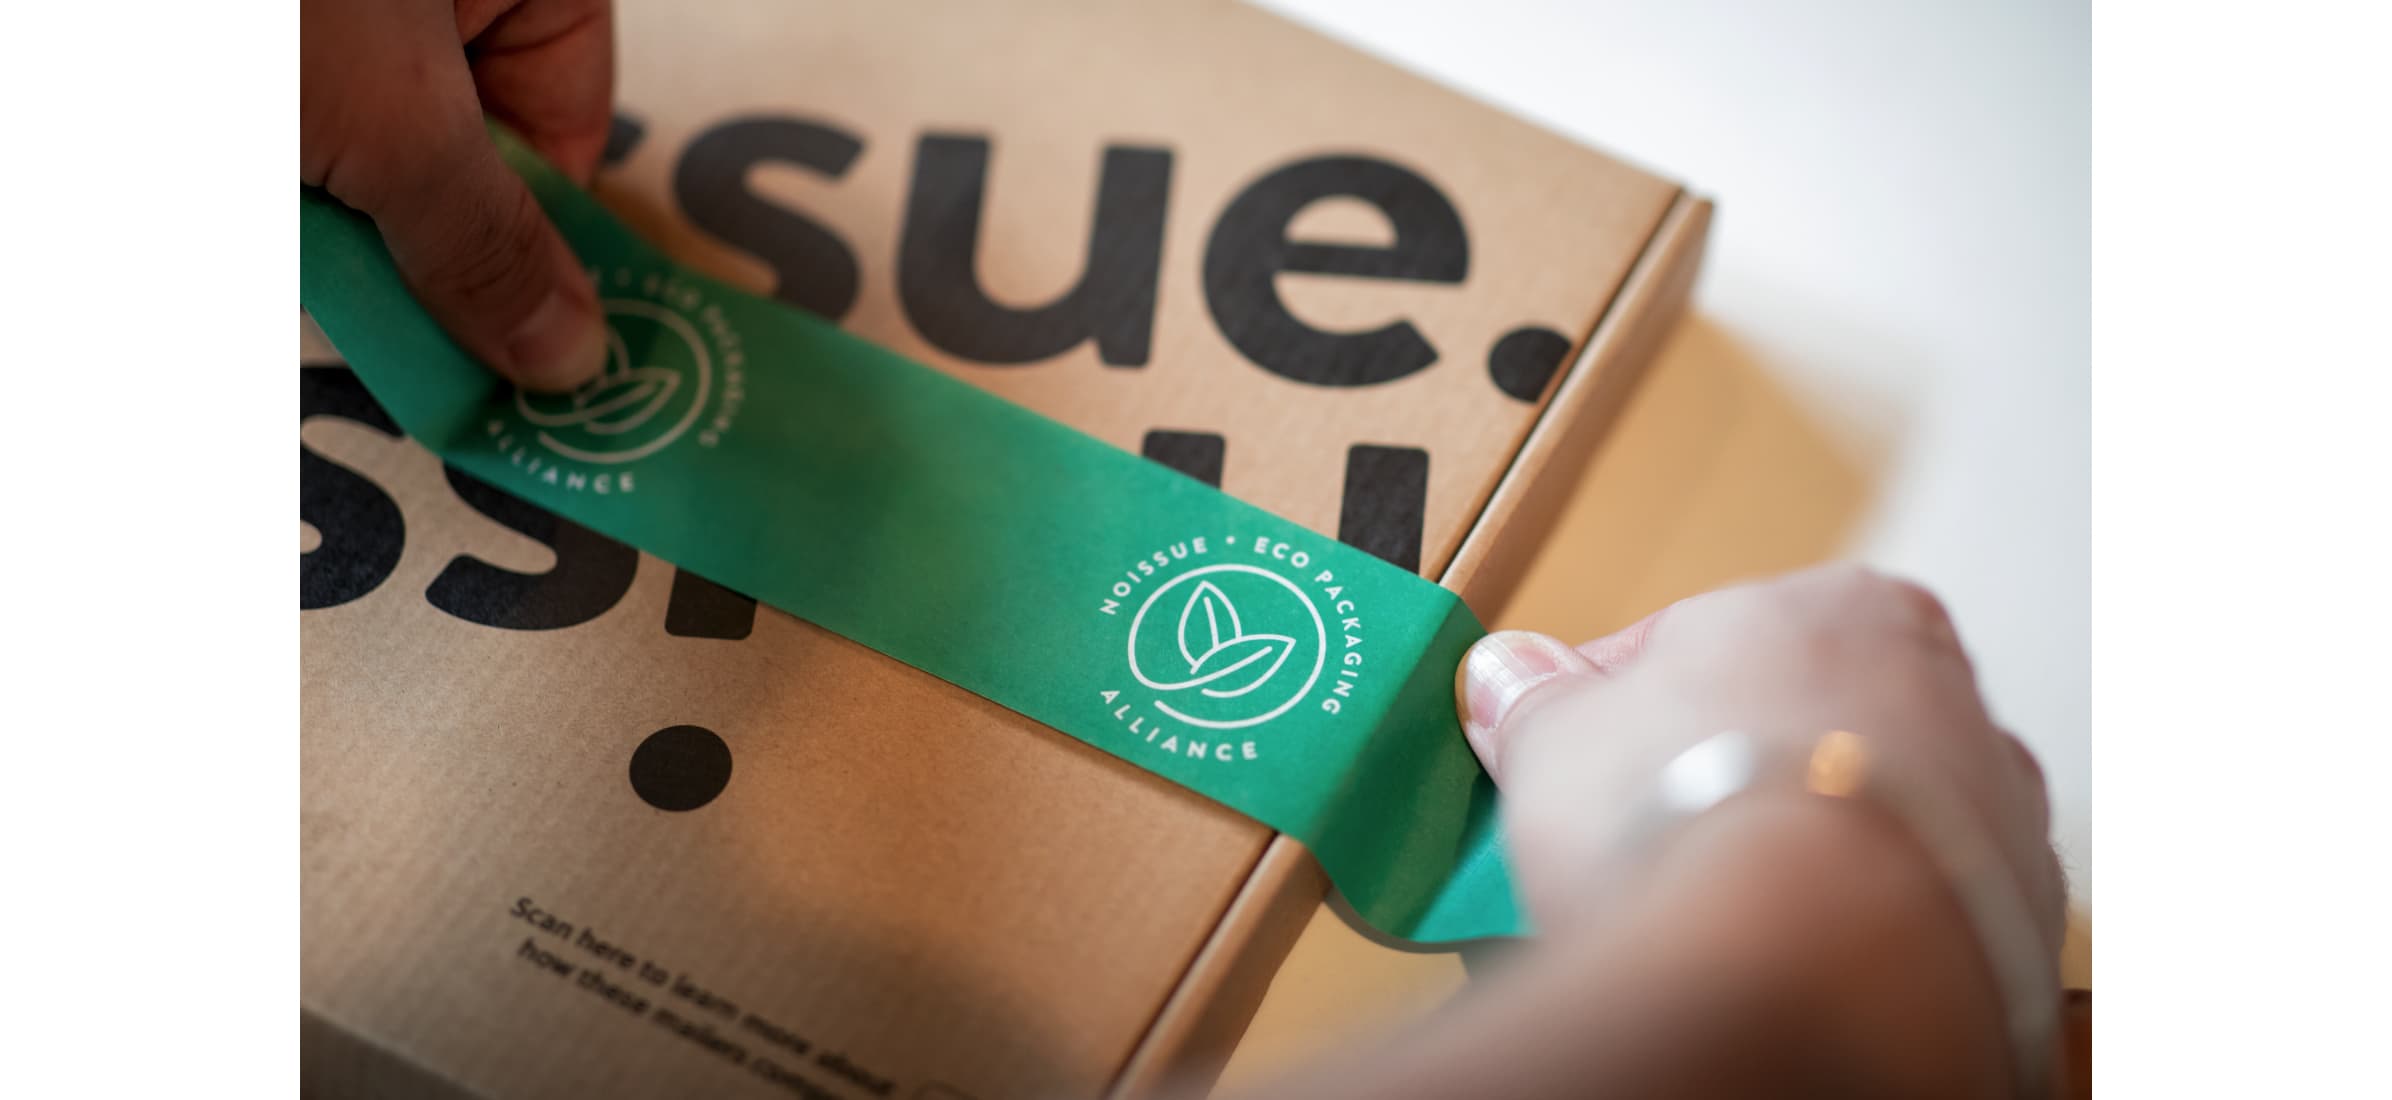 A segment of compostable tape being used to seal a cardboard box.